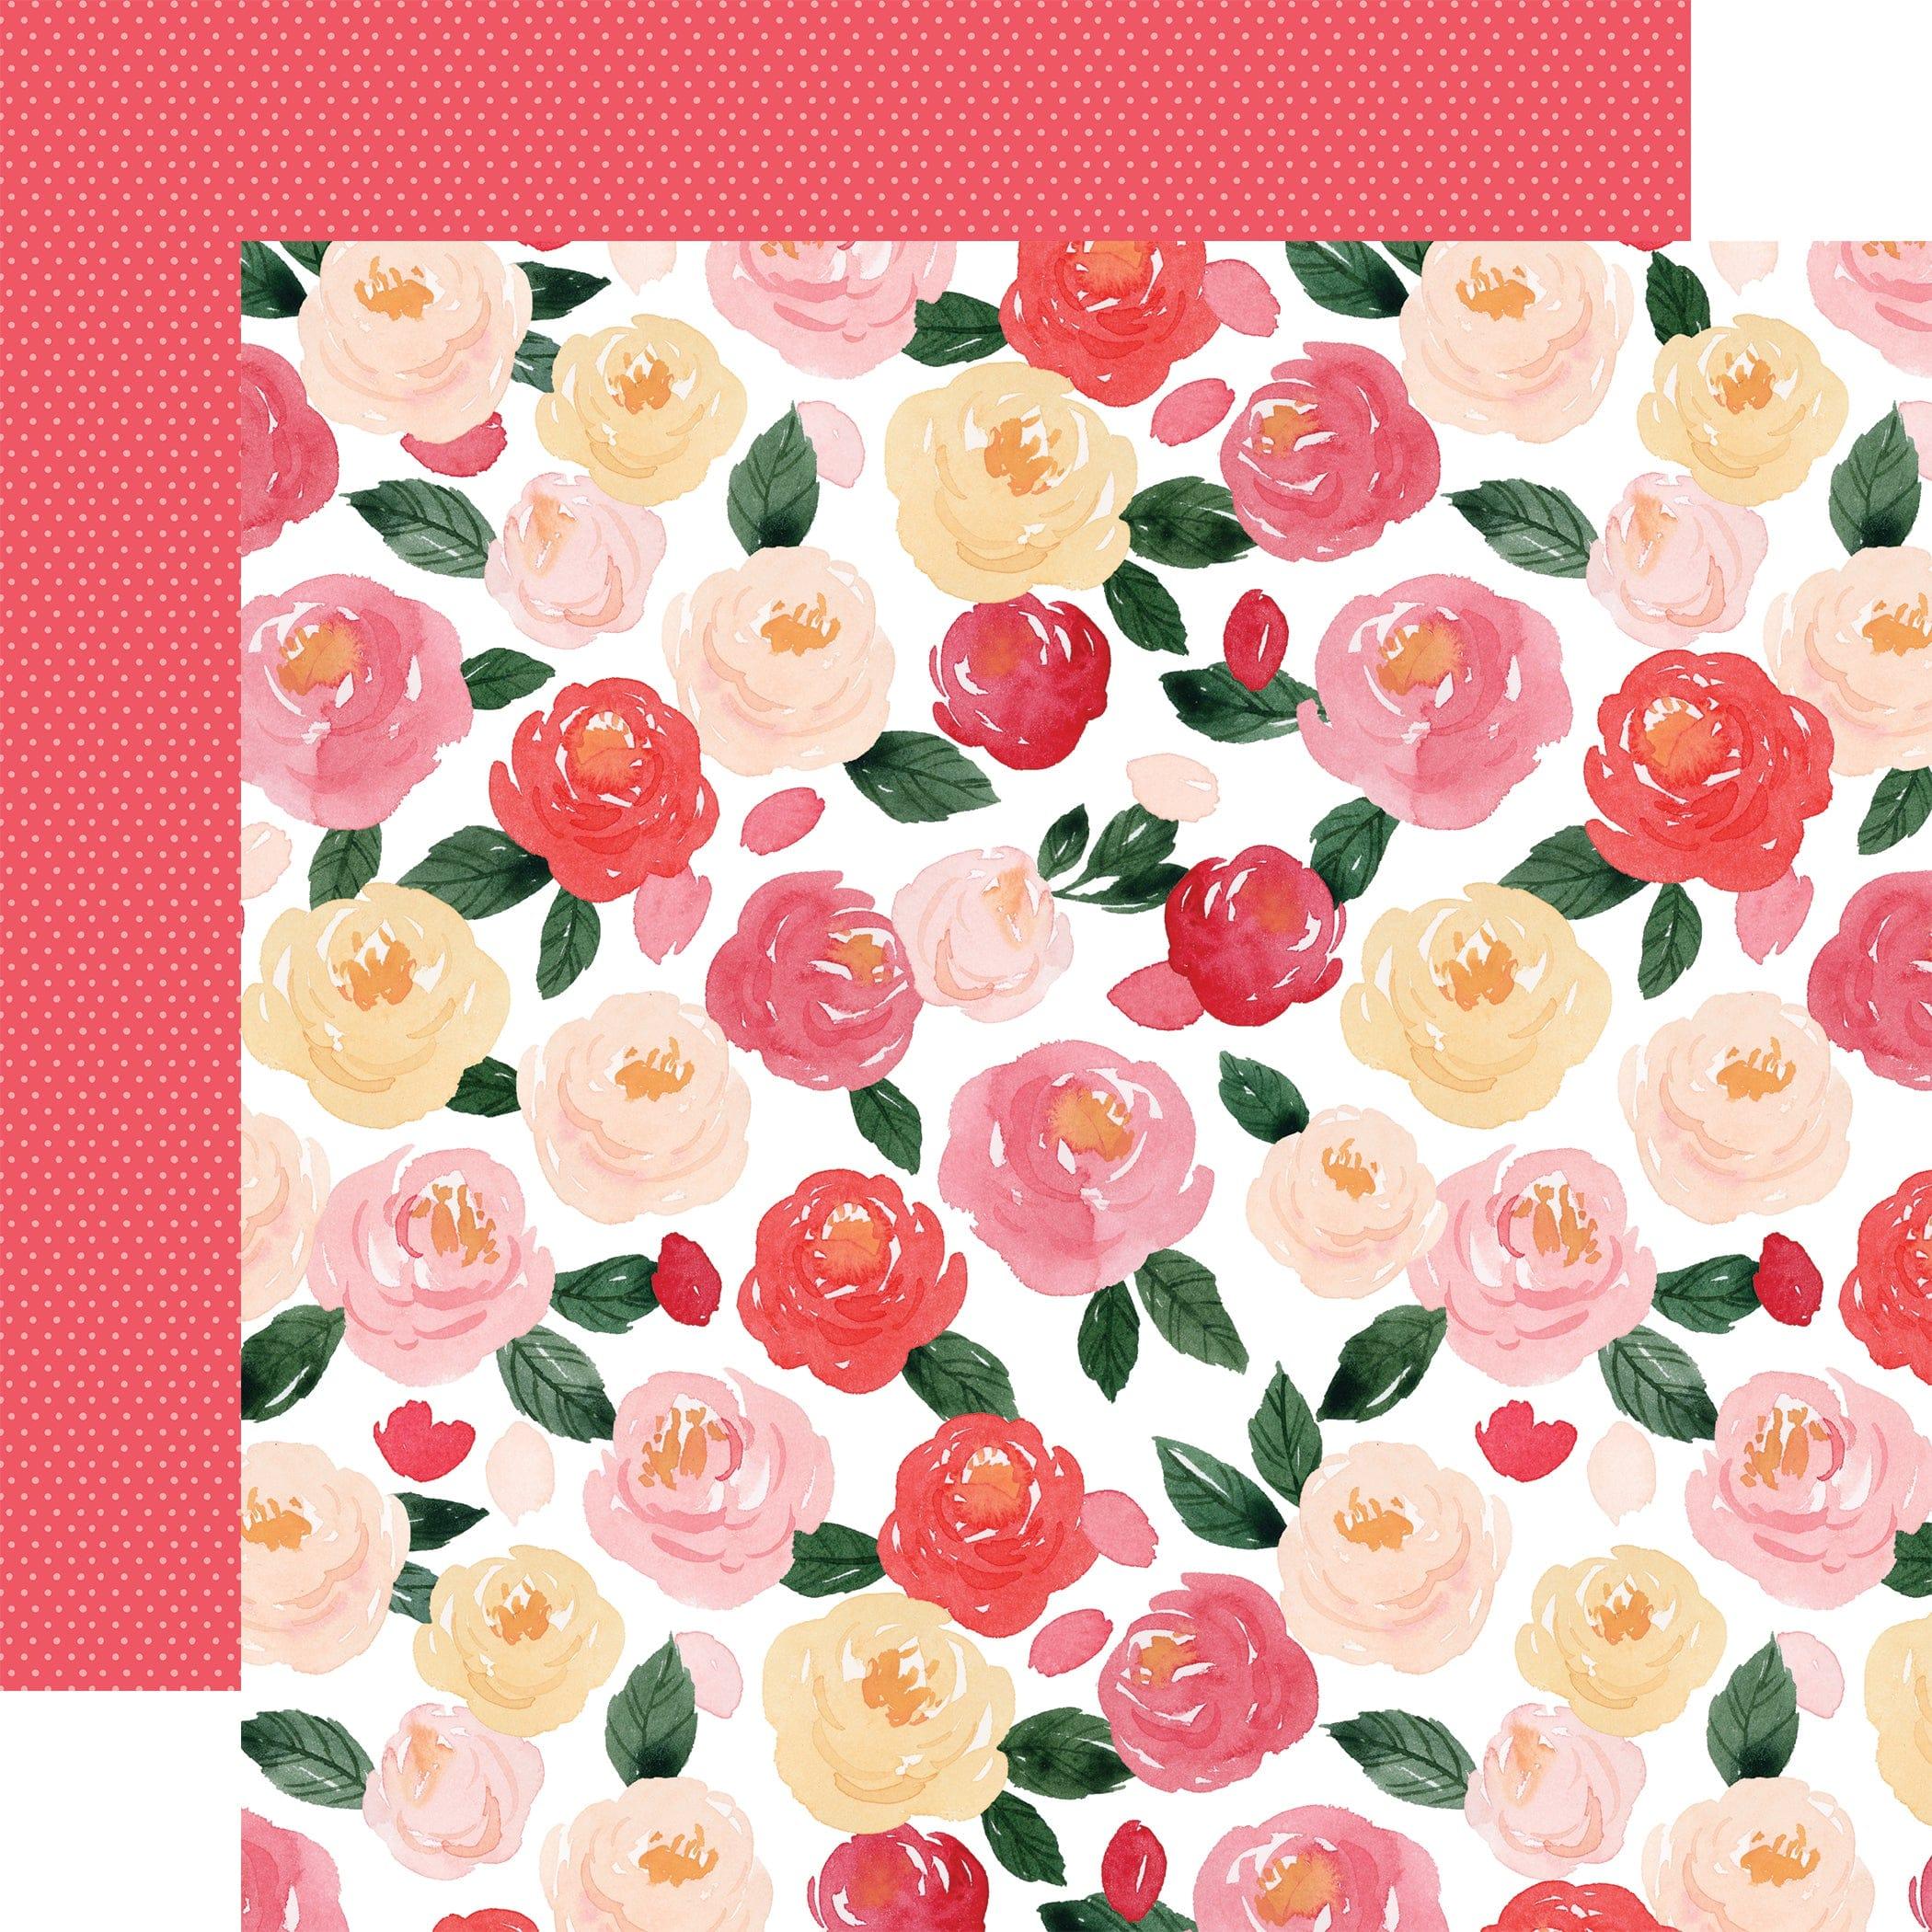 My Valentine Collection Romantic Roses 12 x 12 Double-Sided Scrapbook Paper by Carta Bella - Scrapbook Supply Companies